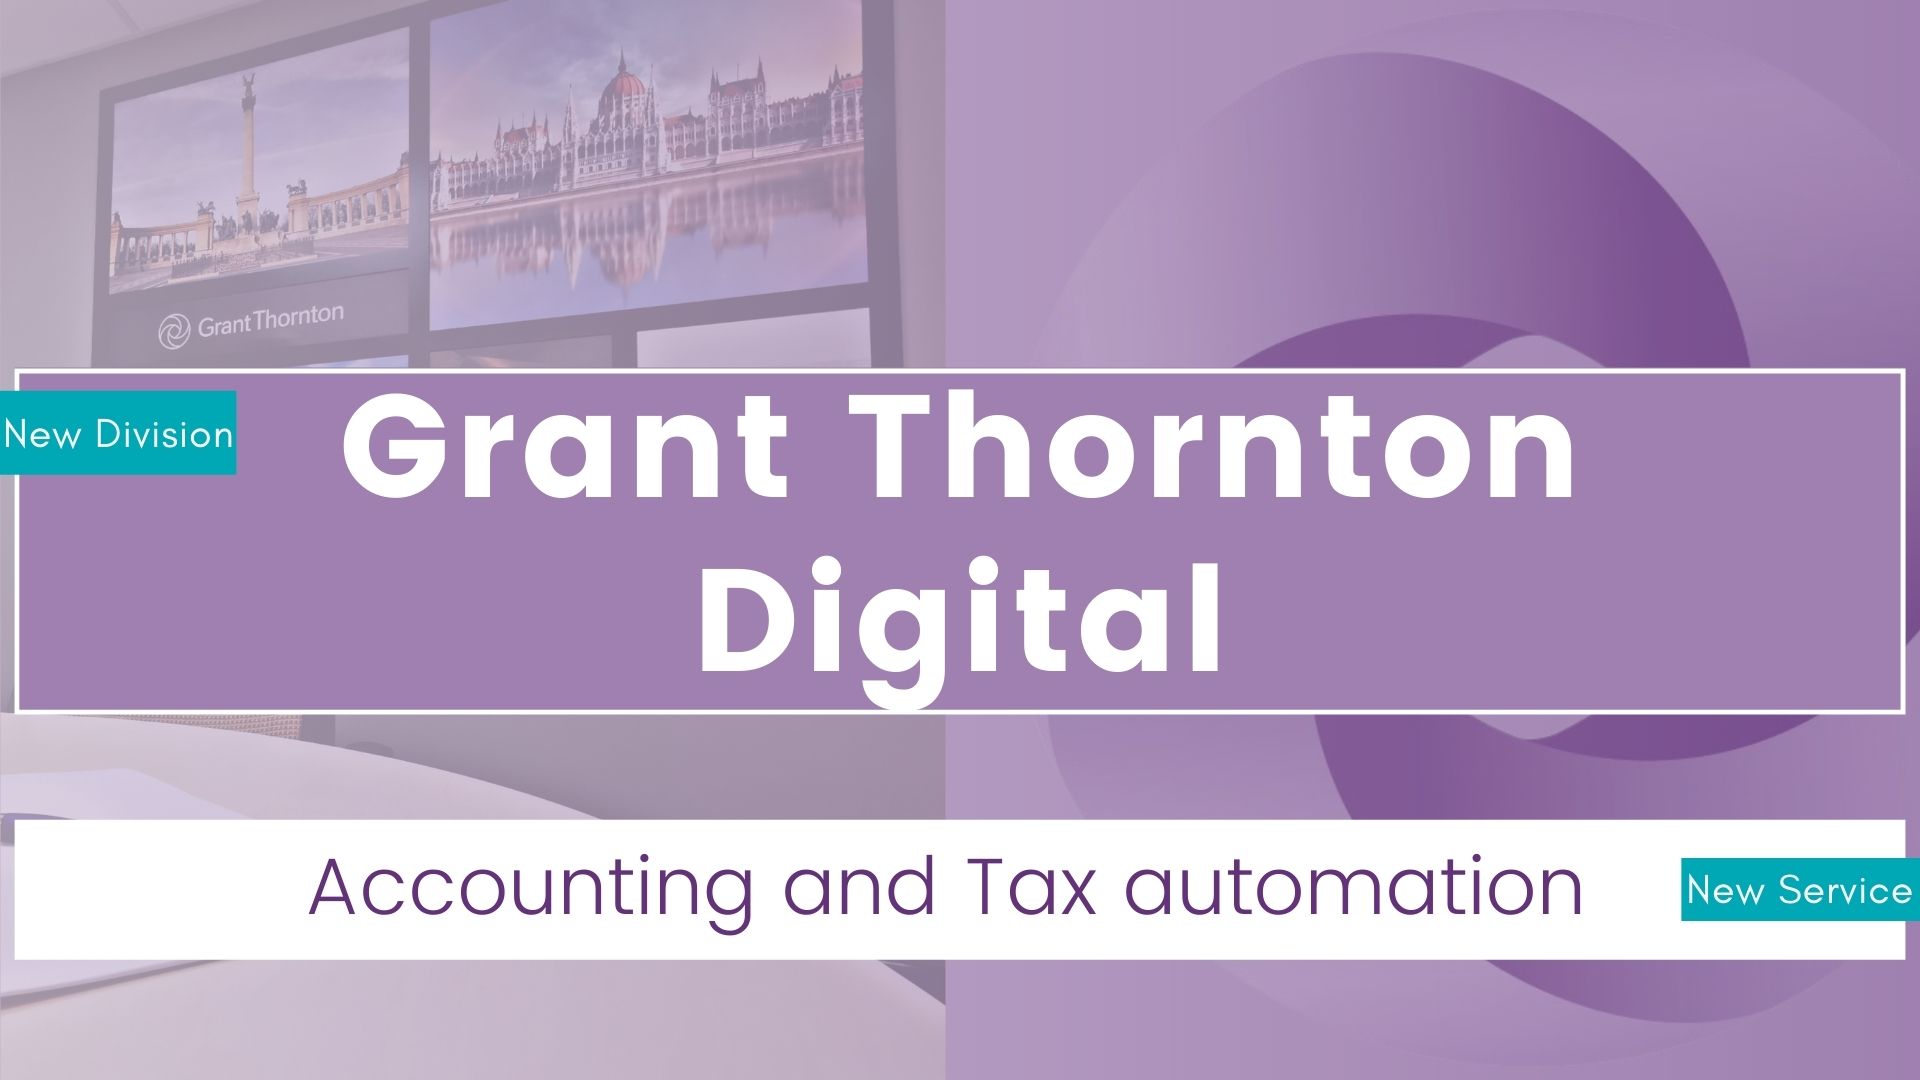 Grant Thornton adds a new area to its consultancy services in Hungary